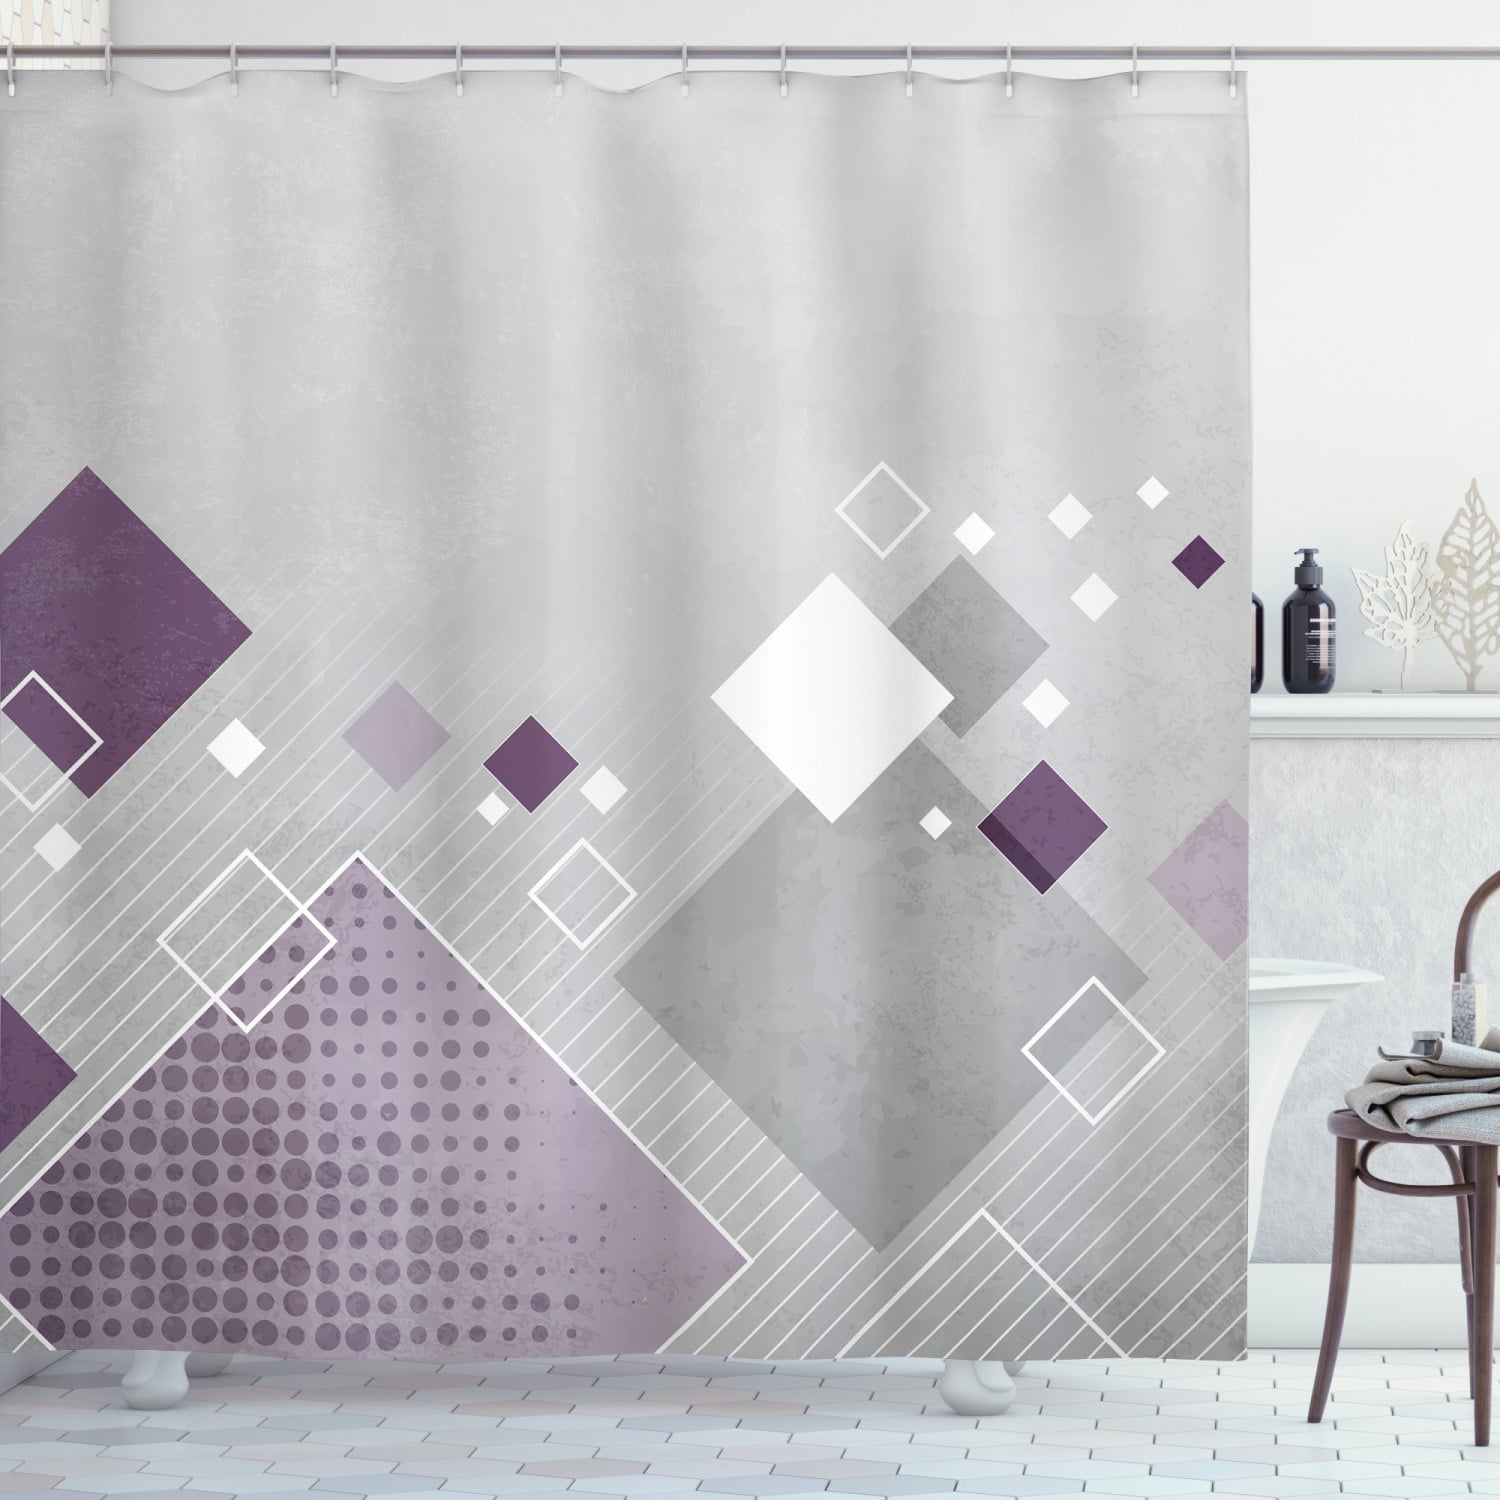 Black and White Geometric Patterns Grid Squares Shower Curtain Waterproof Fabric 